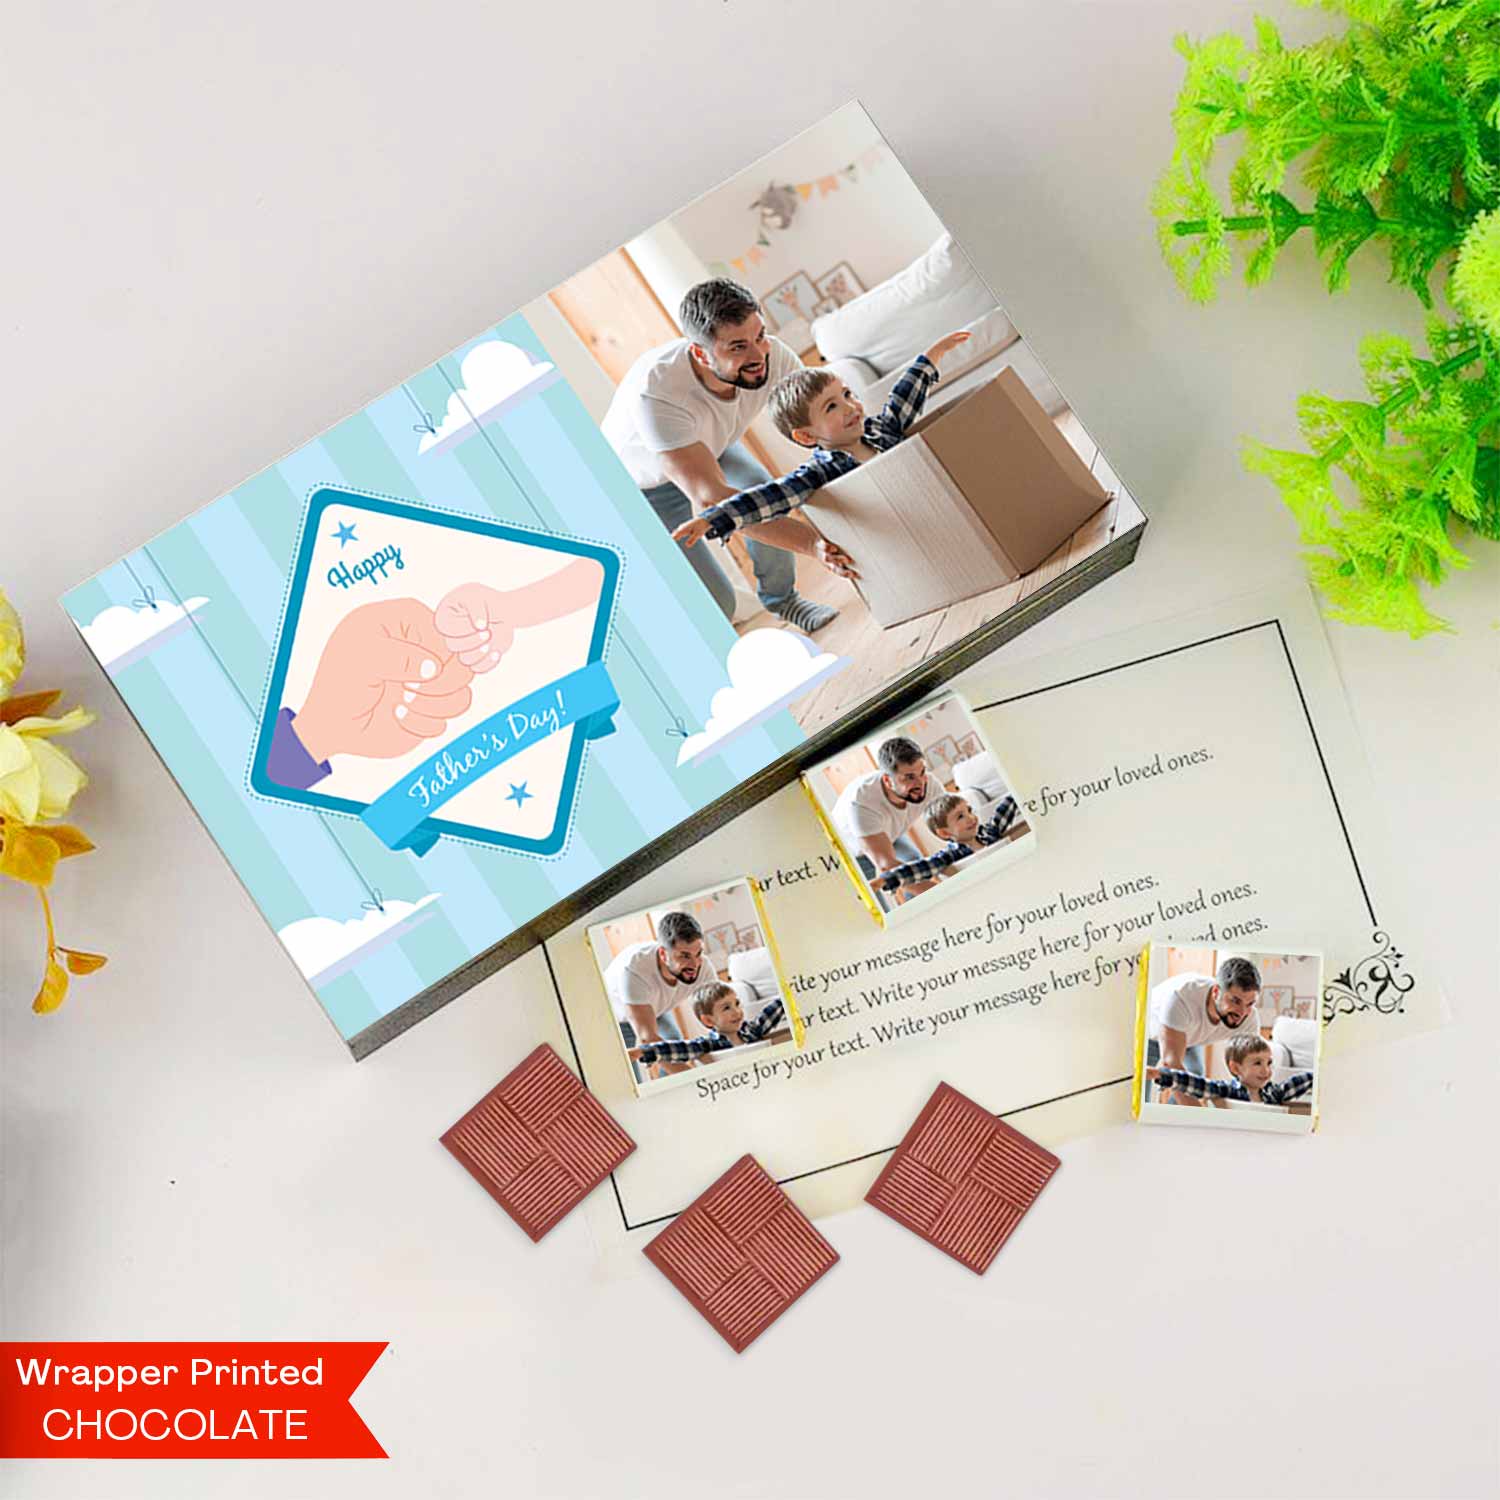 Fist bump clipart printed wrapped chocolates for father's day